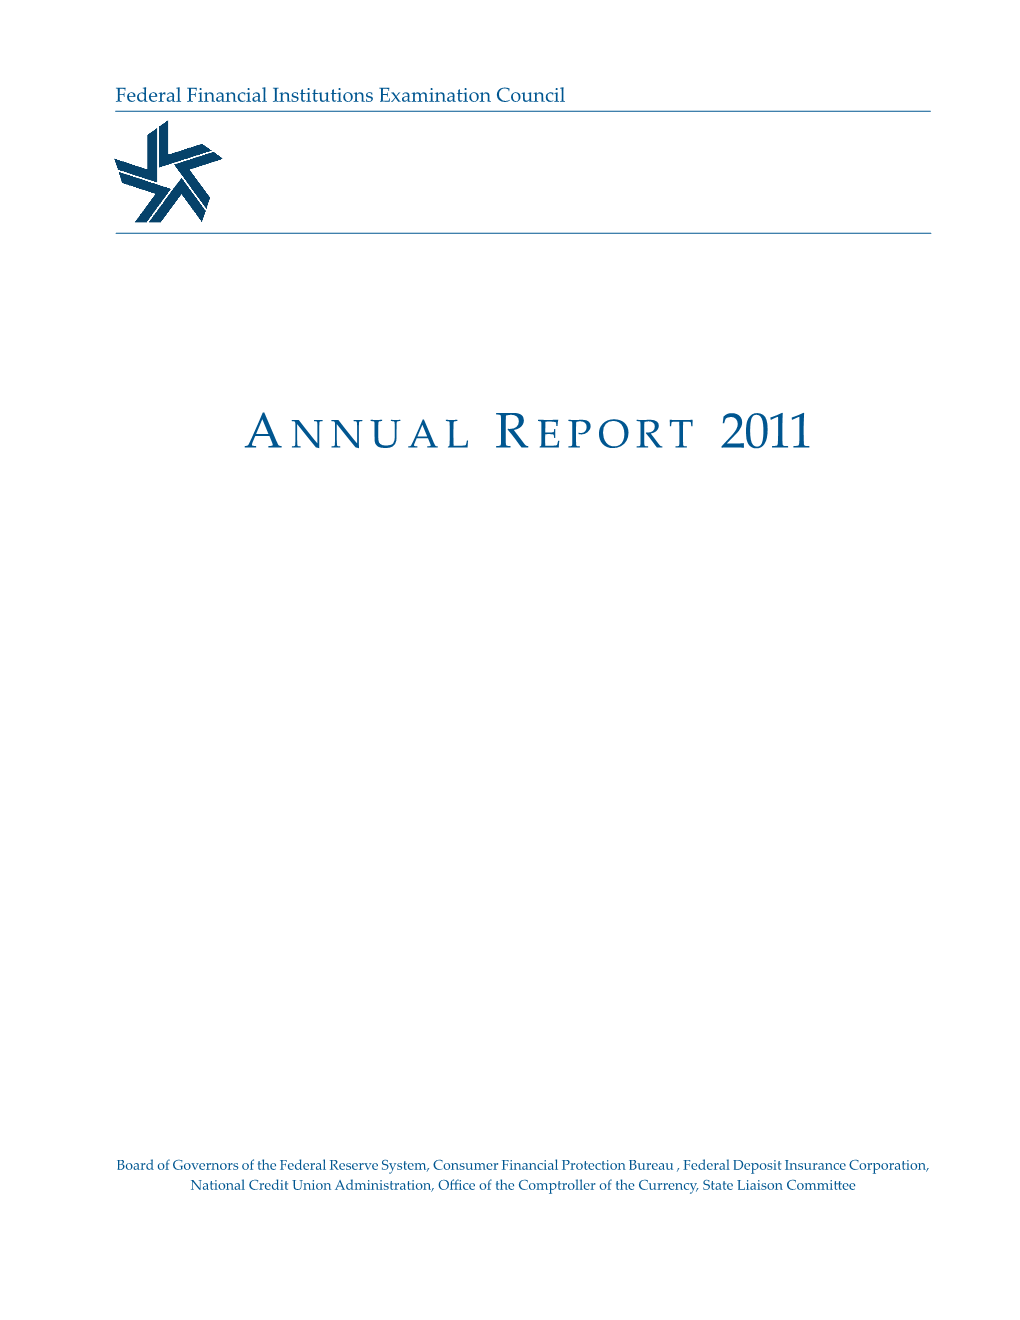 Federal Financial Institutions Exanimation Council Annual Report